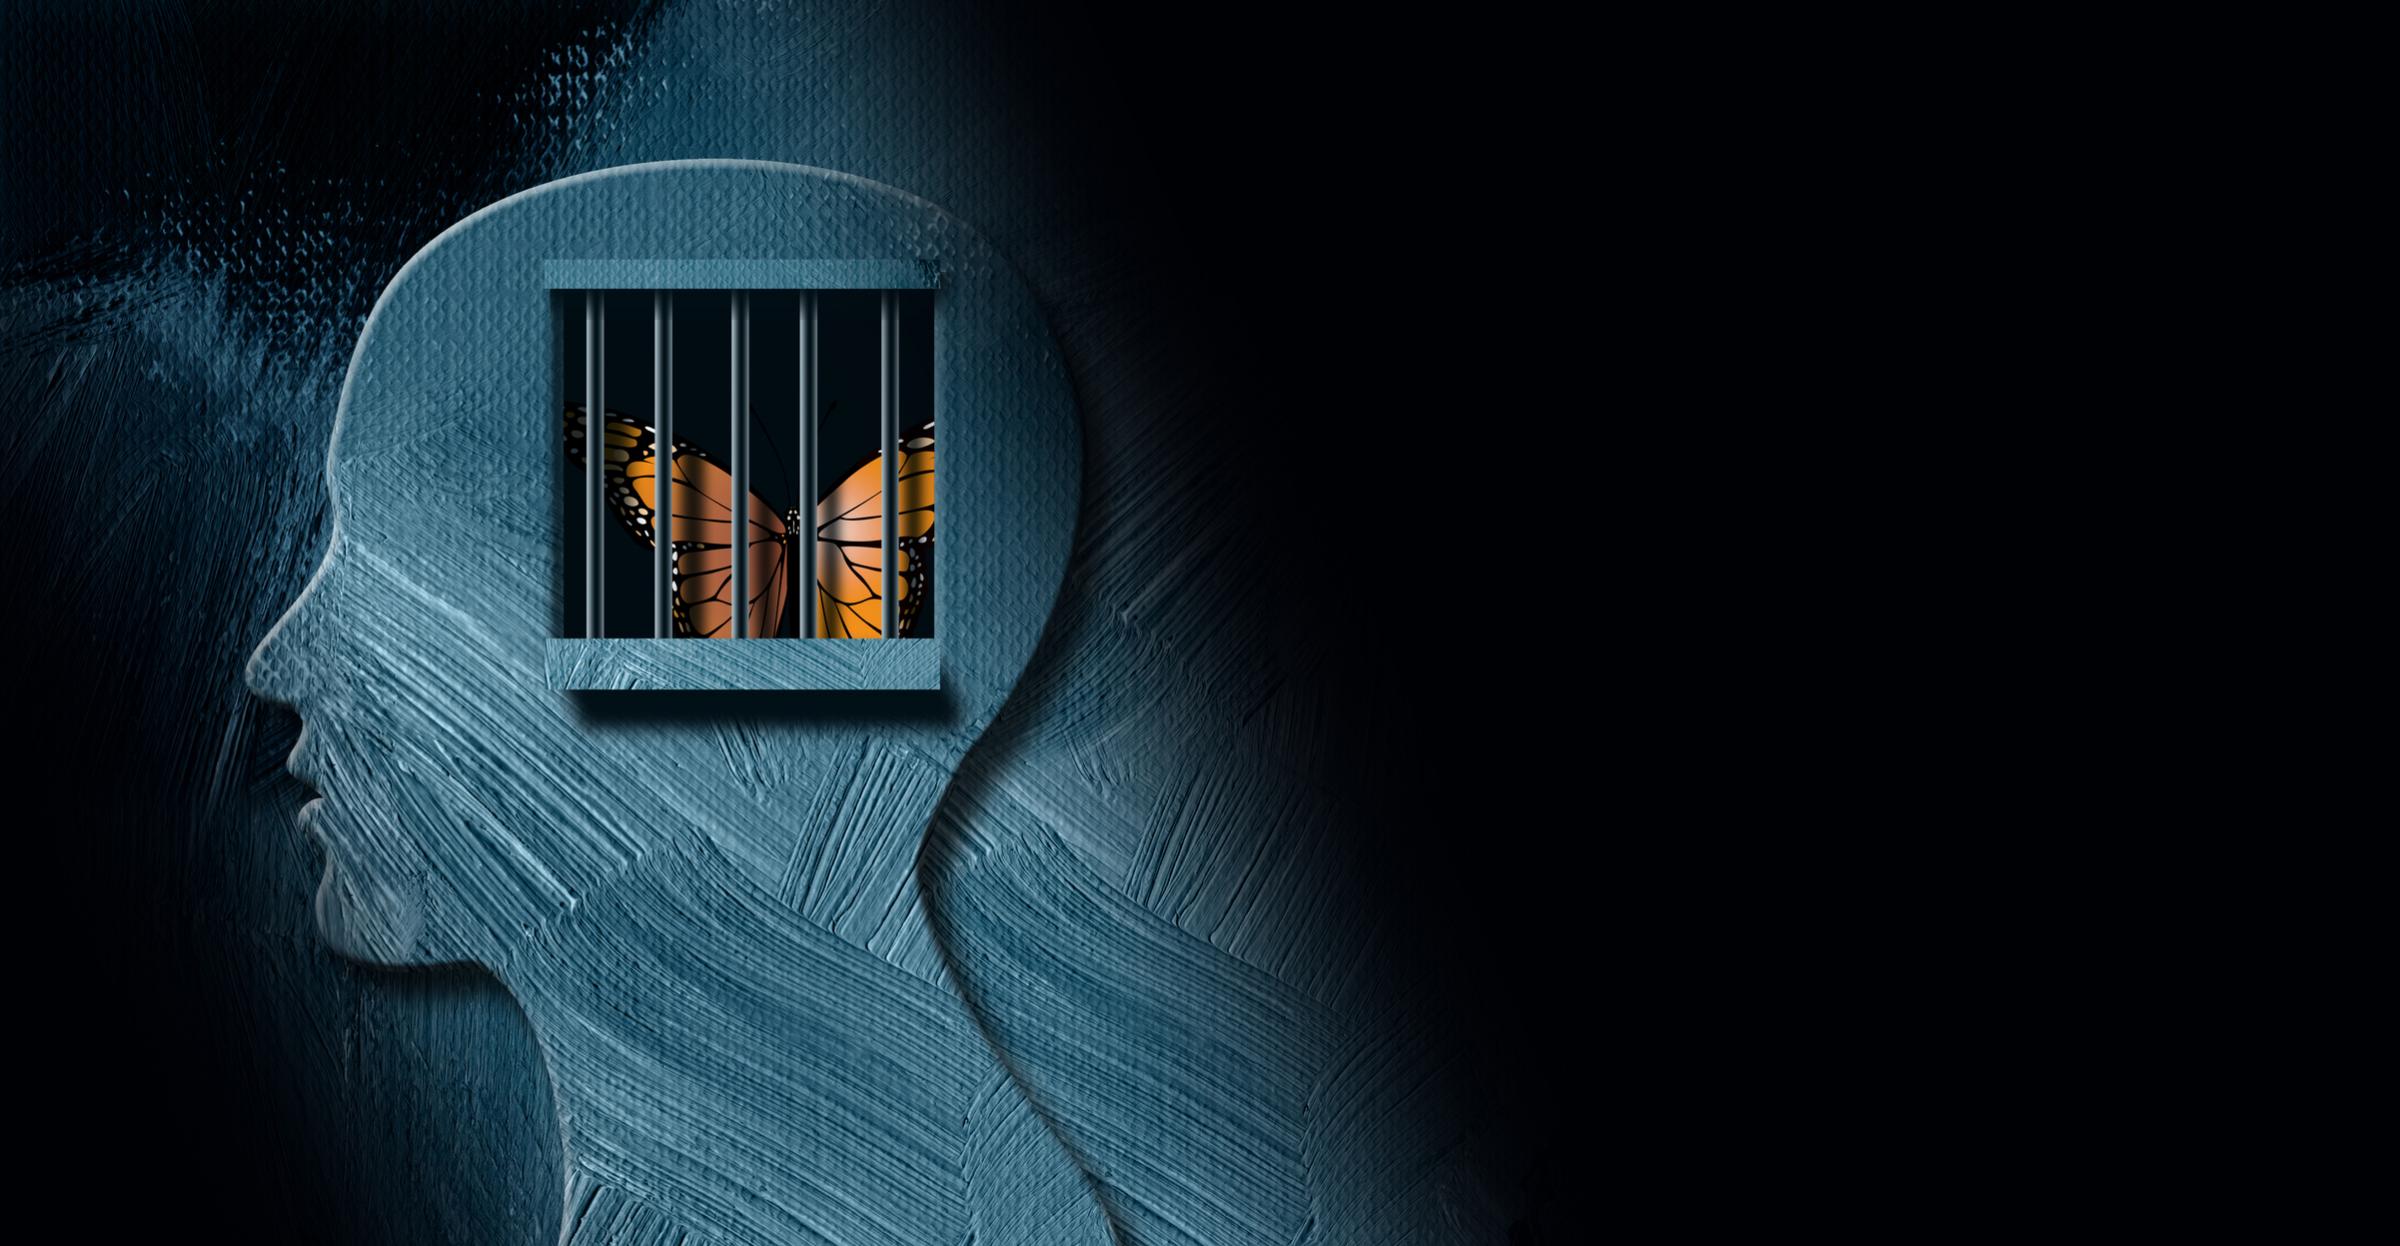 Graphic abstract design of concept of being emotionally or mentally challenged. Strong, dramatic image of iconic butterfly trapped behind prison bars.